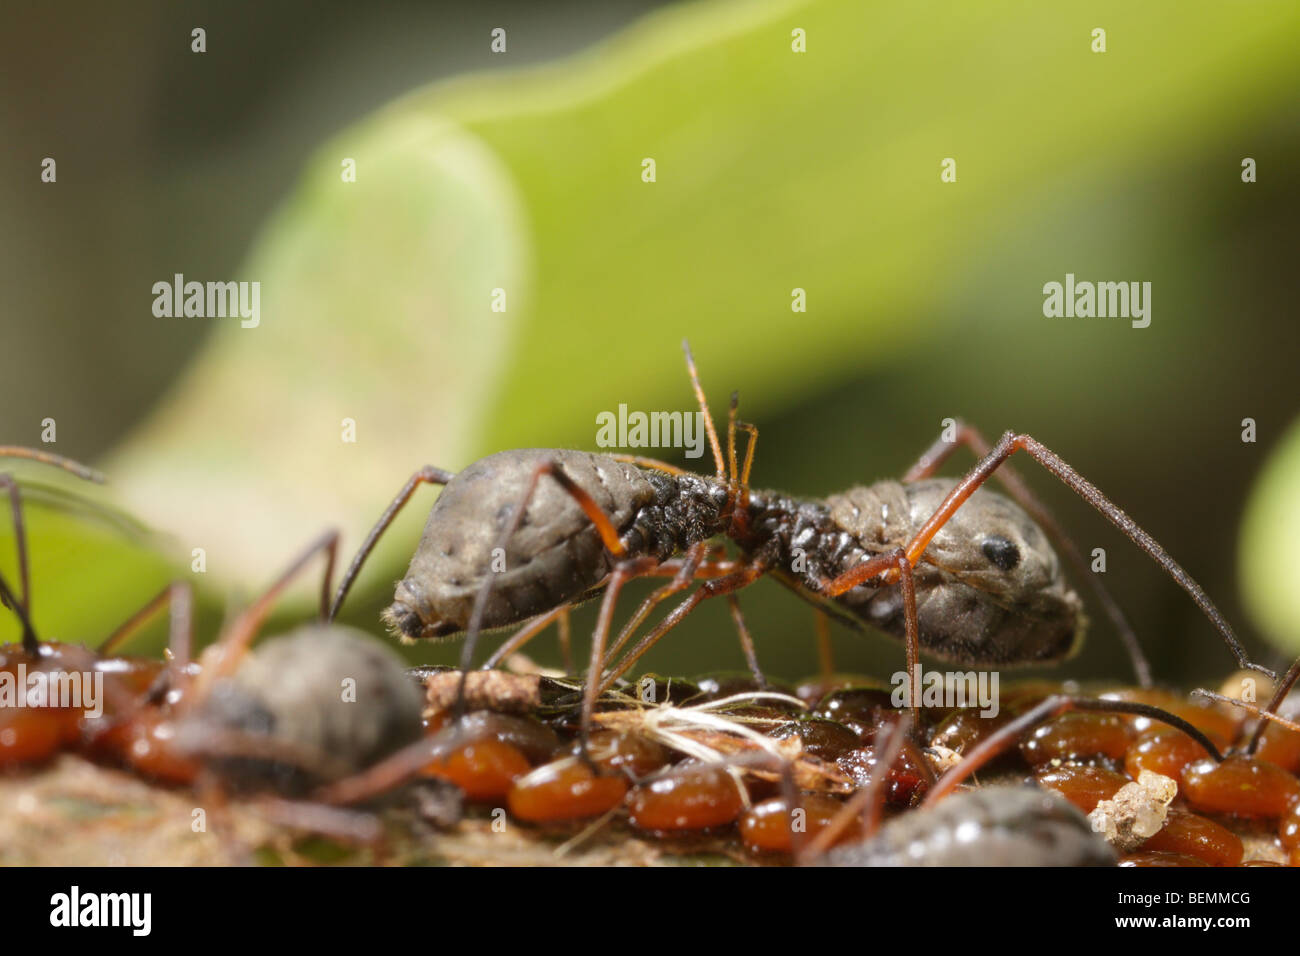 Lachnus roboris, an aphid that feeds on oak. These females guards freshly laid eggs. Stock Photo